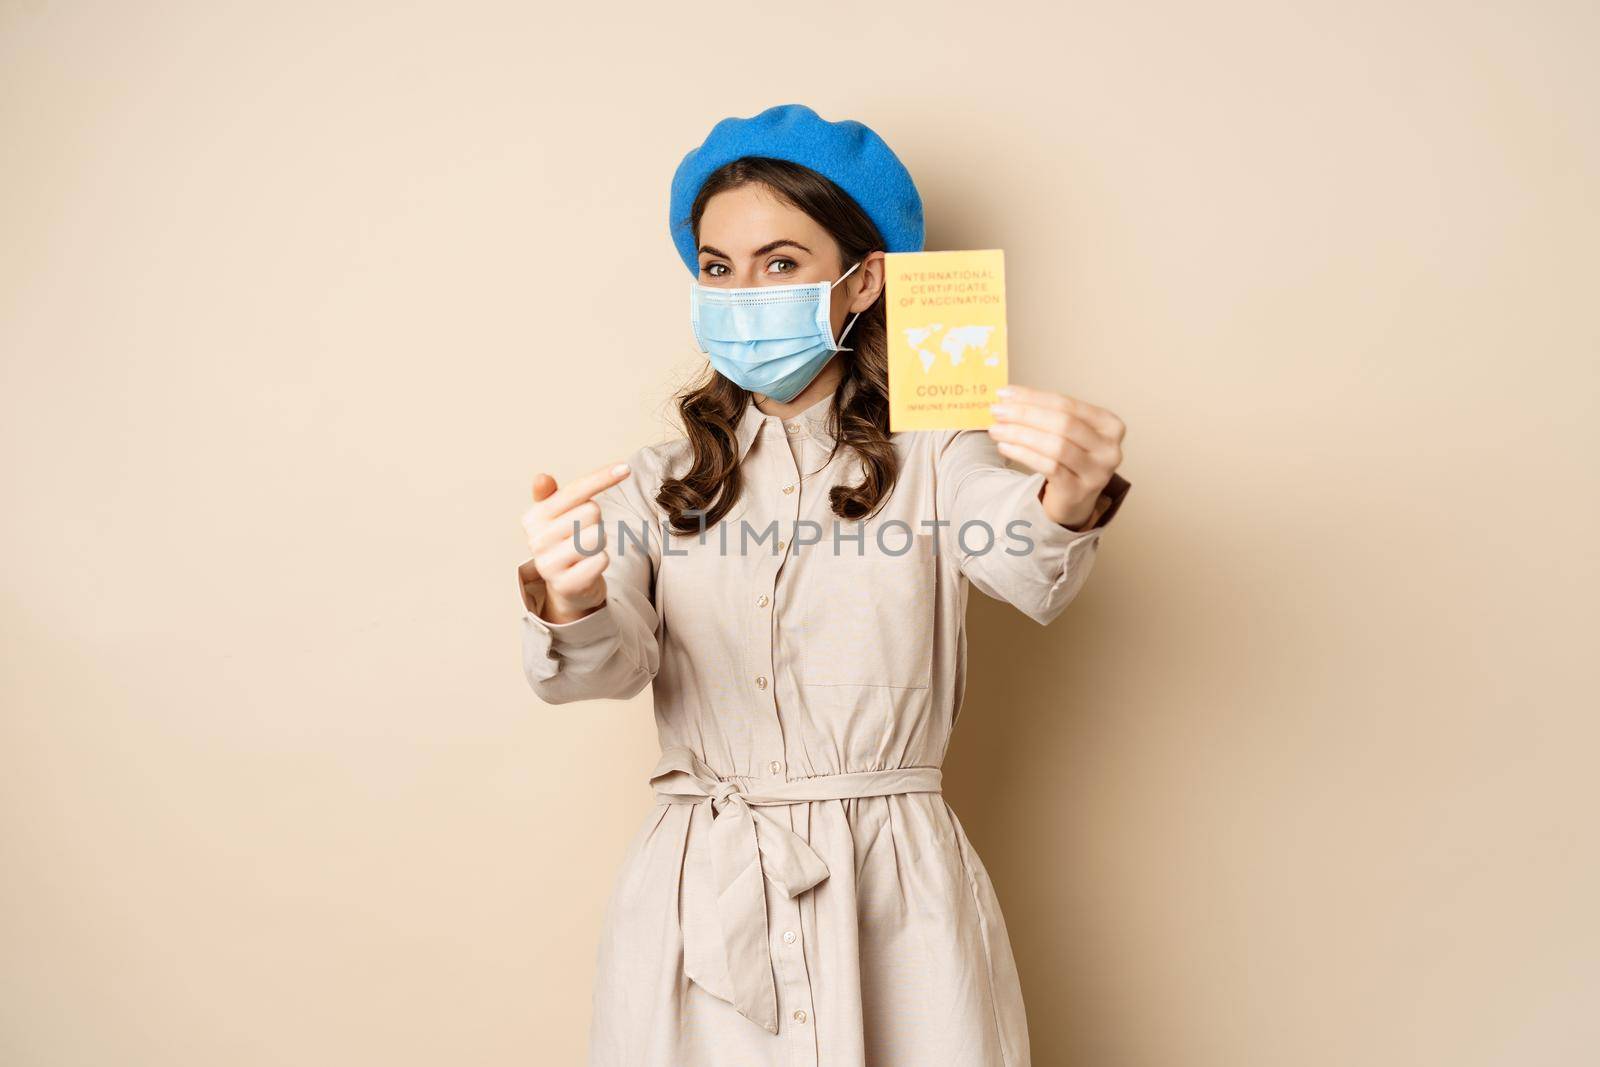 Covid pandemic and travelling concept. Girl tourist in medical face mask, travel vaccinated, showing international vaccination passport during coronavirus outbreak.